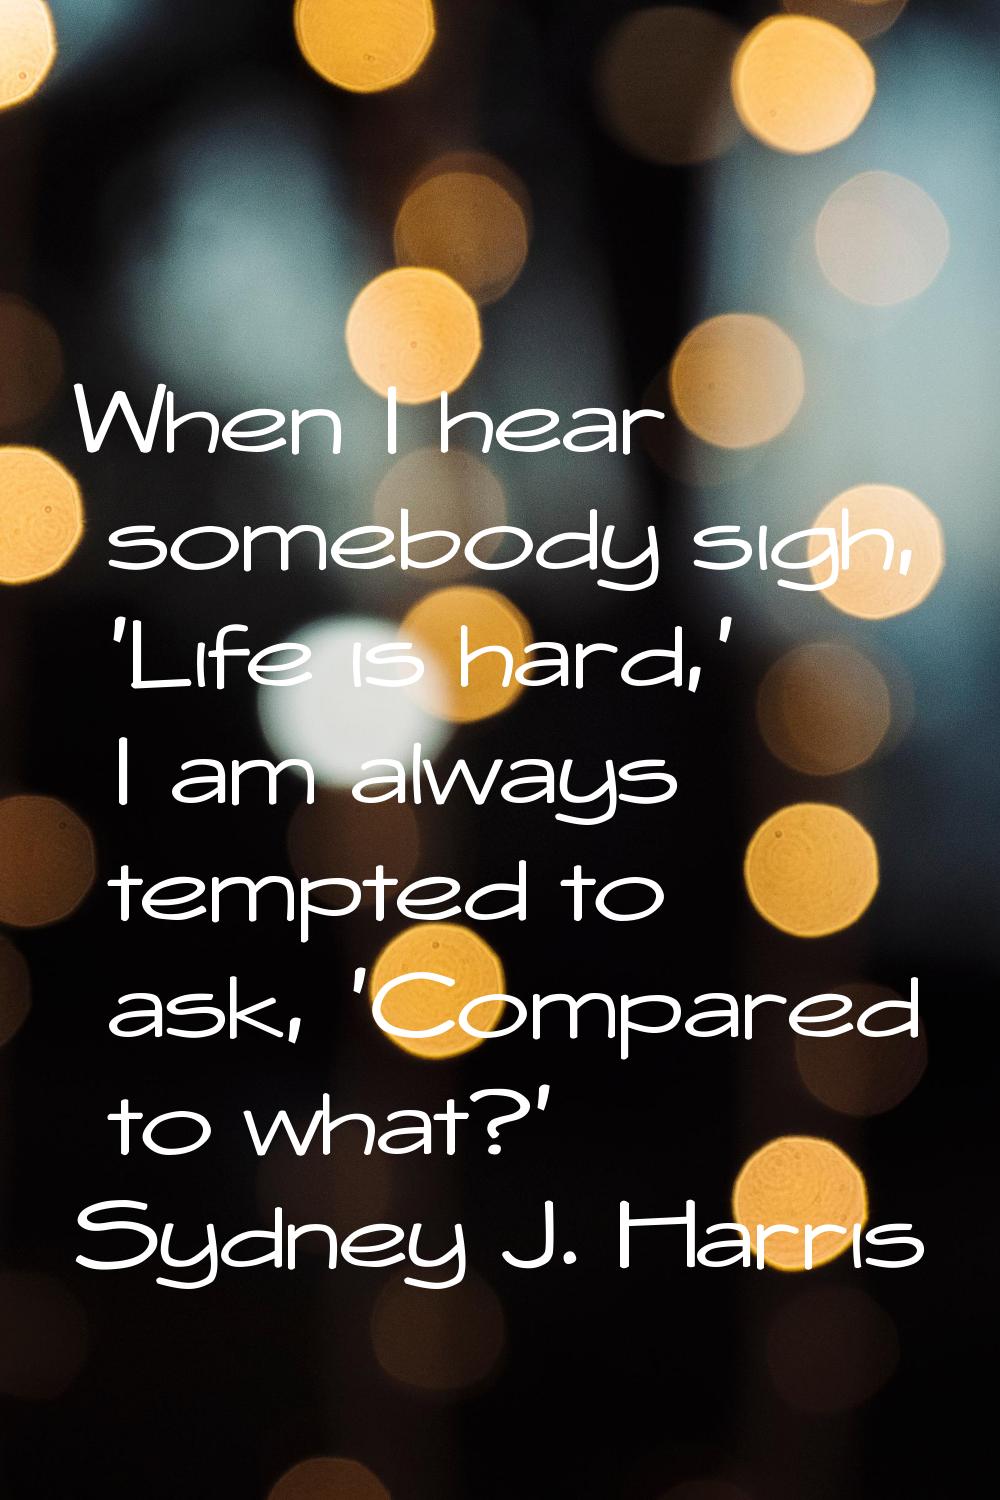 When I hear somebody sigh, 'Life is hard,' I am always tempted to ask, 'Compared to what?'